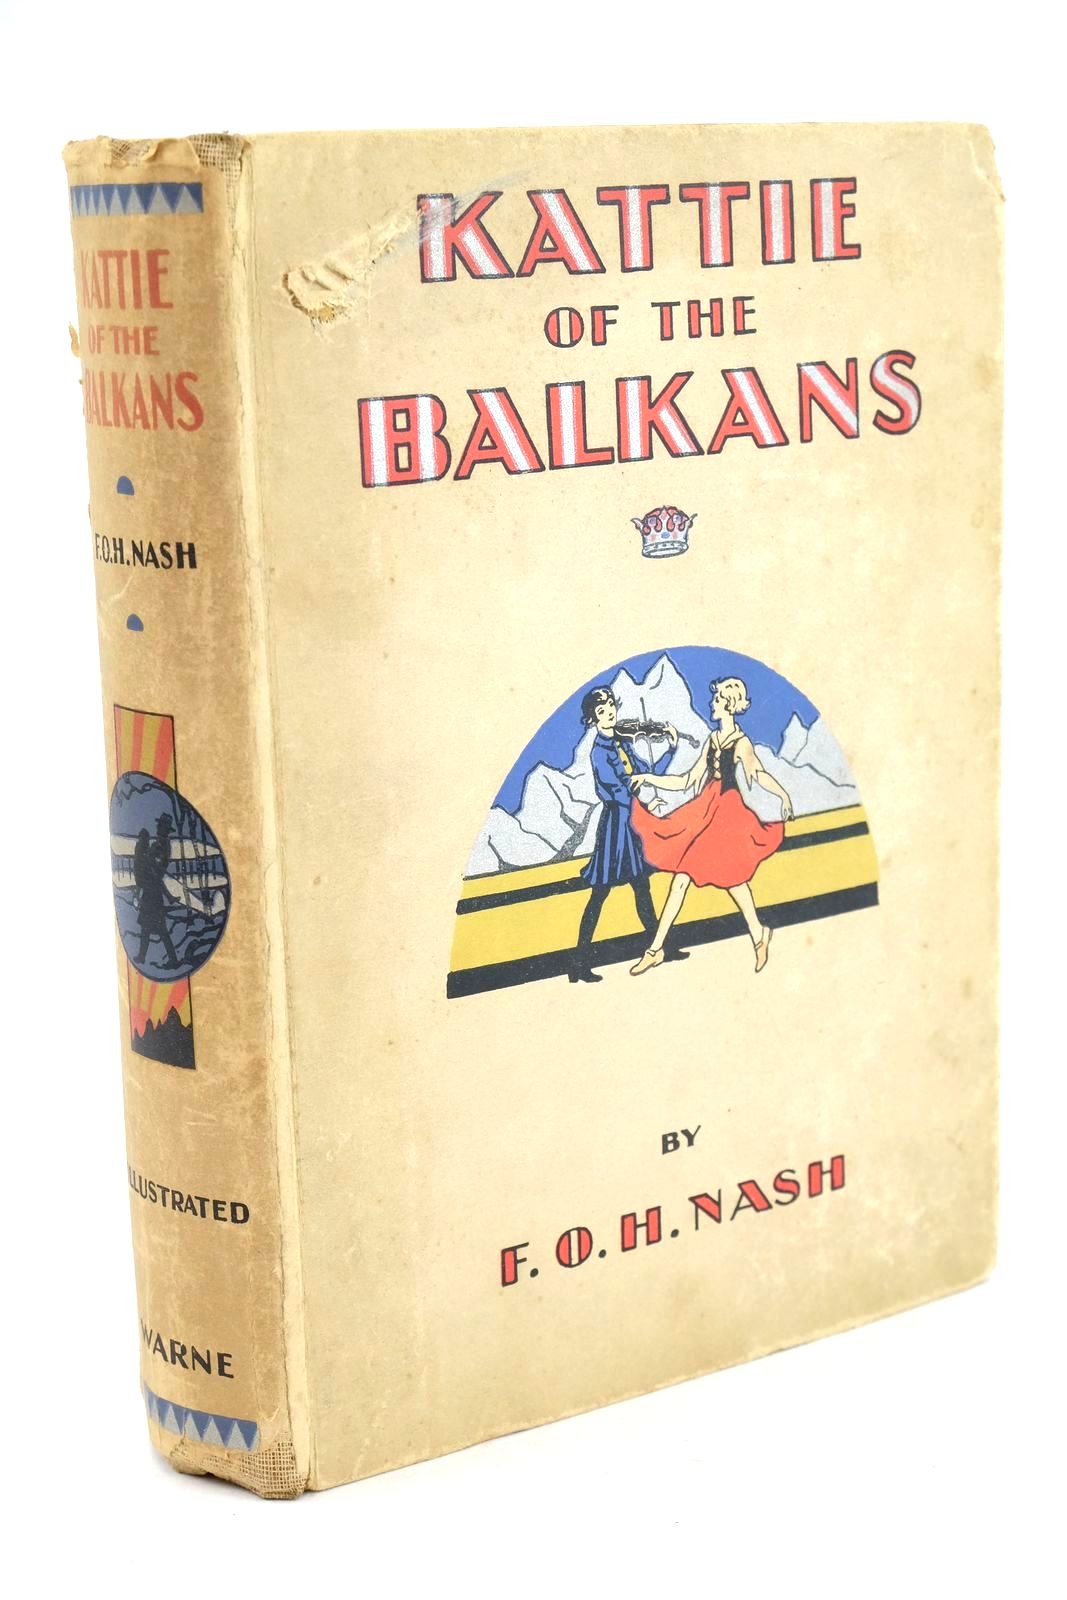 Photo of KATTIE OF THE BALKANS written by Nash, F.O.H. illustrated by Pollock, J.M. published by Frederick Warne &amp; Co Ltd. (STOCK CODE: 1325231)  for sale by Stella & Rose's Books